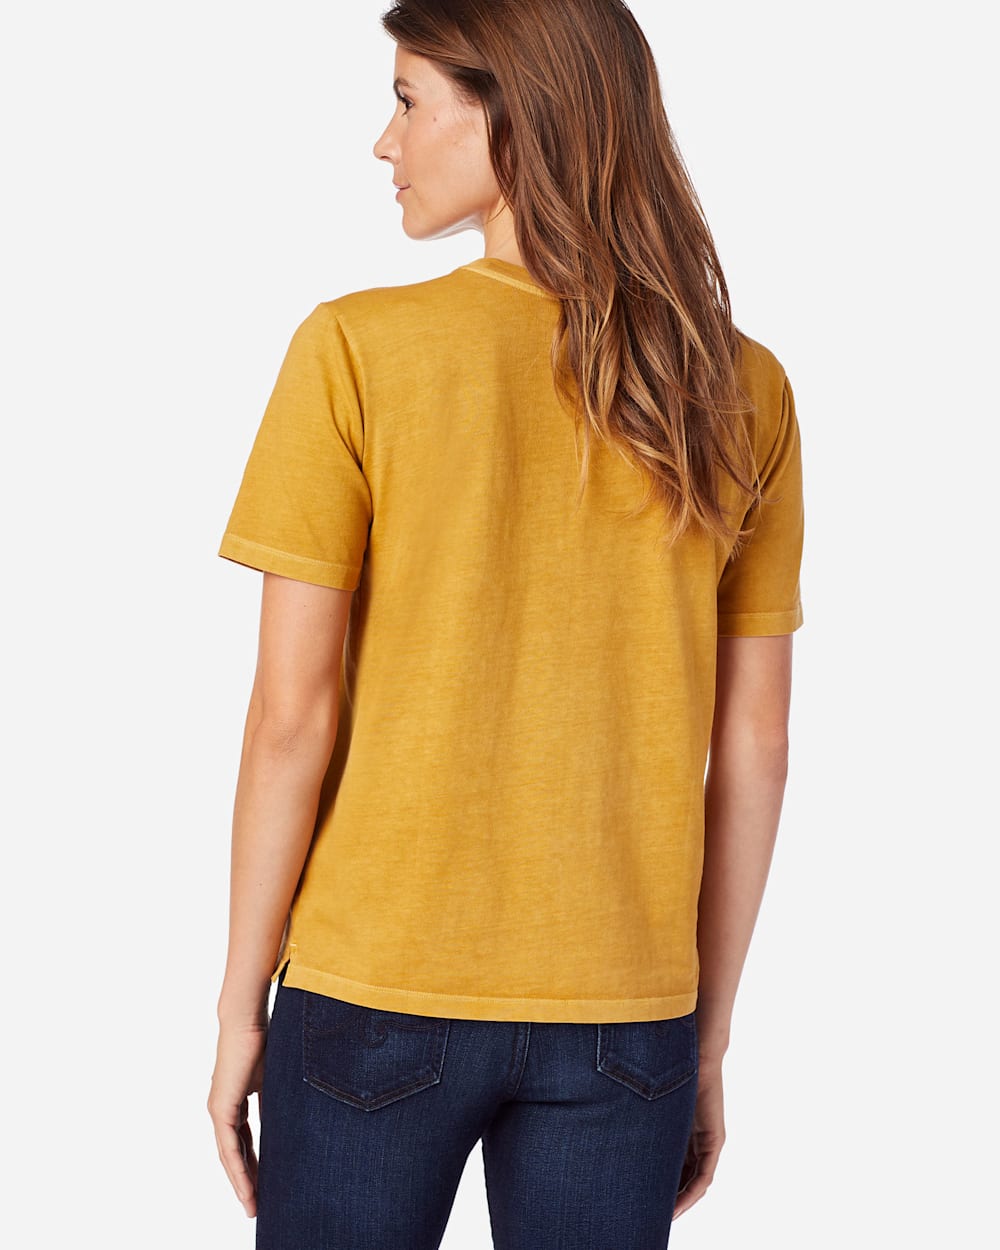 ALTERNATE VIEW OF WOMEN'S DESCHUTES EMBROIDERED TEE IN MUSTARD image number 3